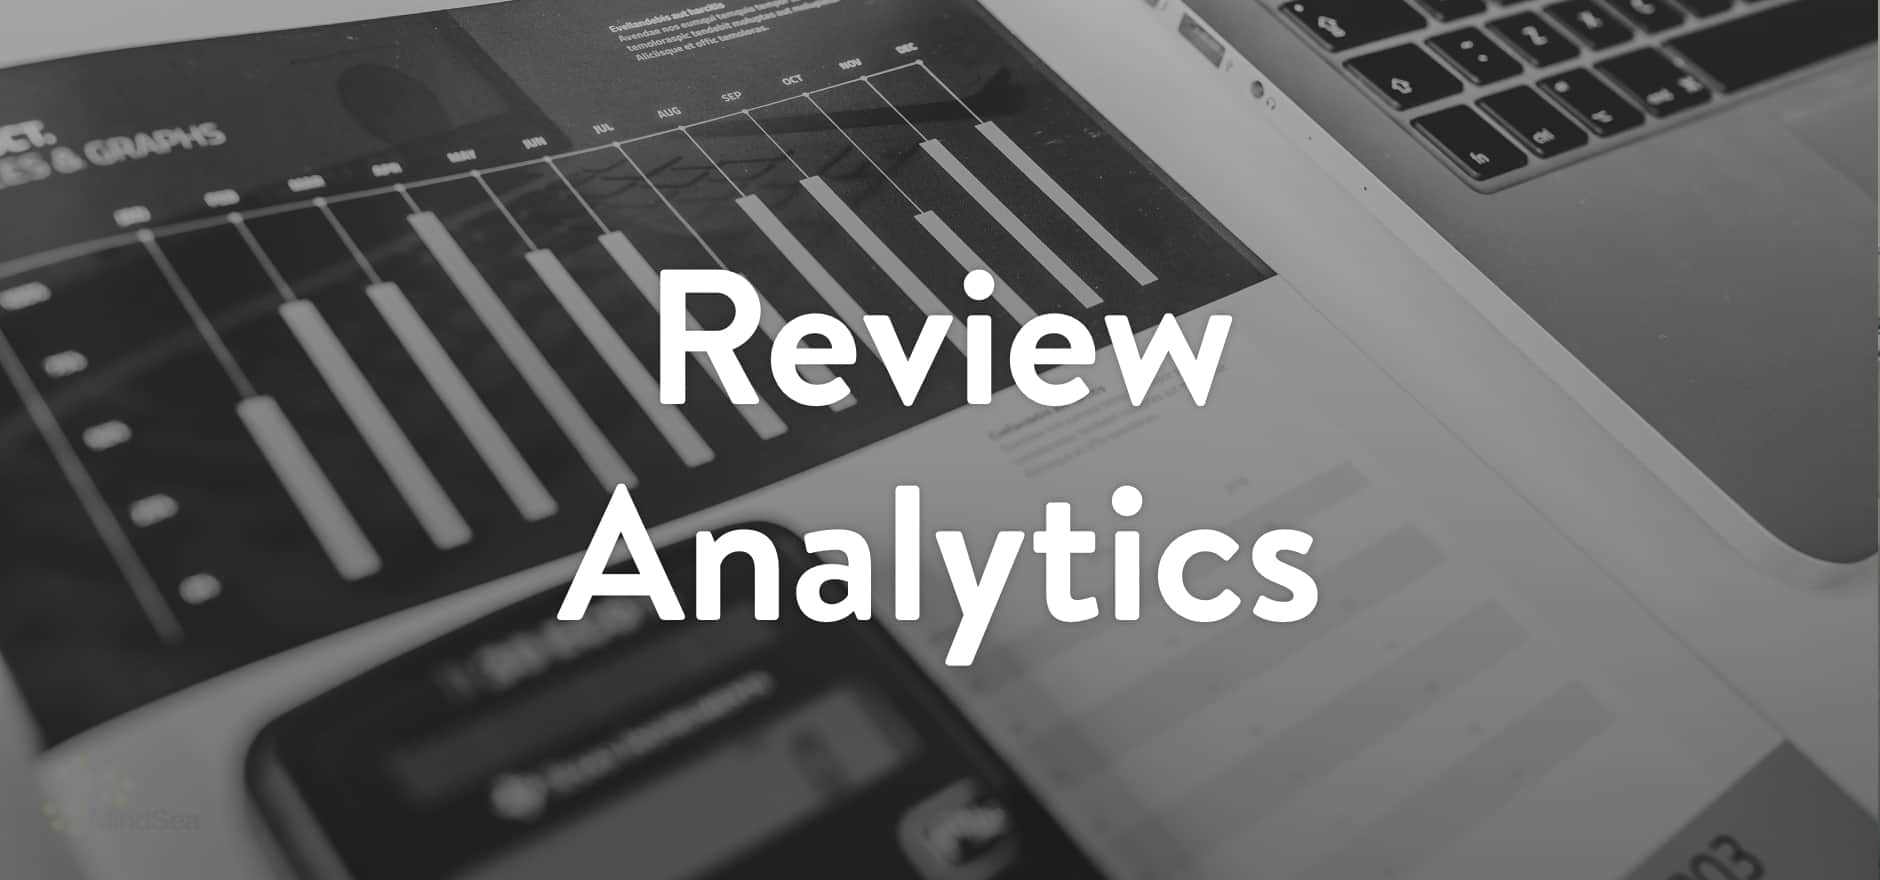 Iterate Quickly by Reviewing Analytics